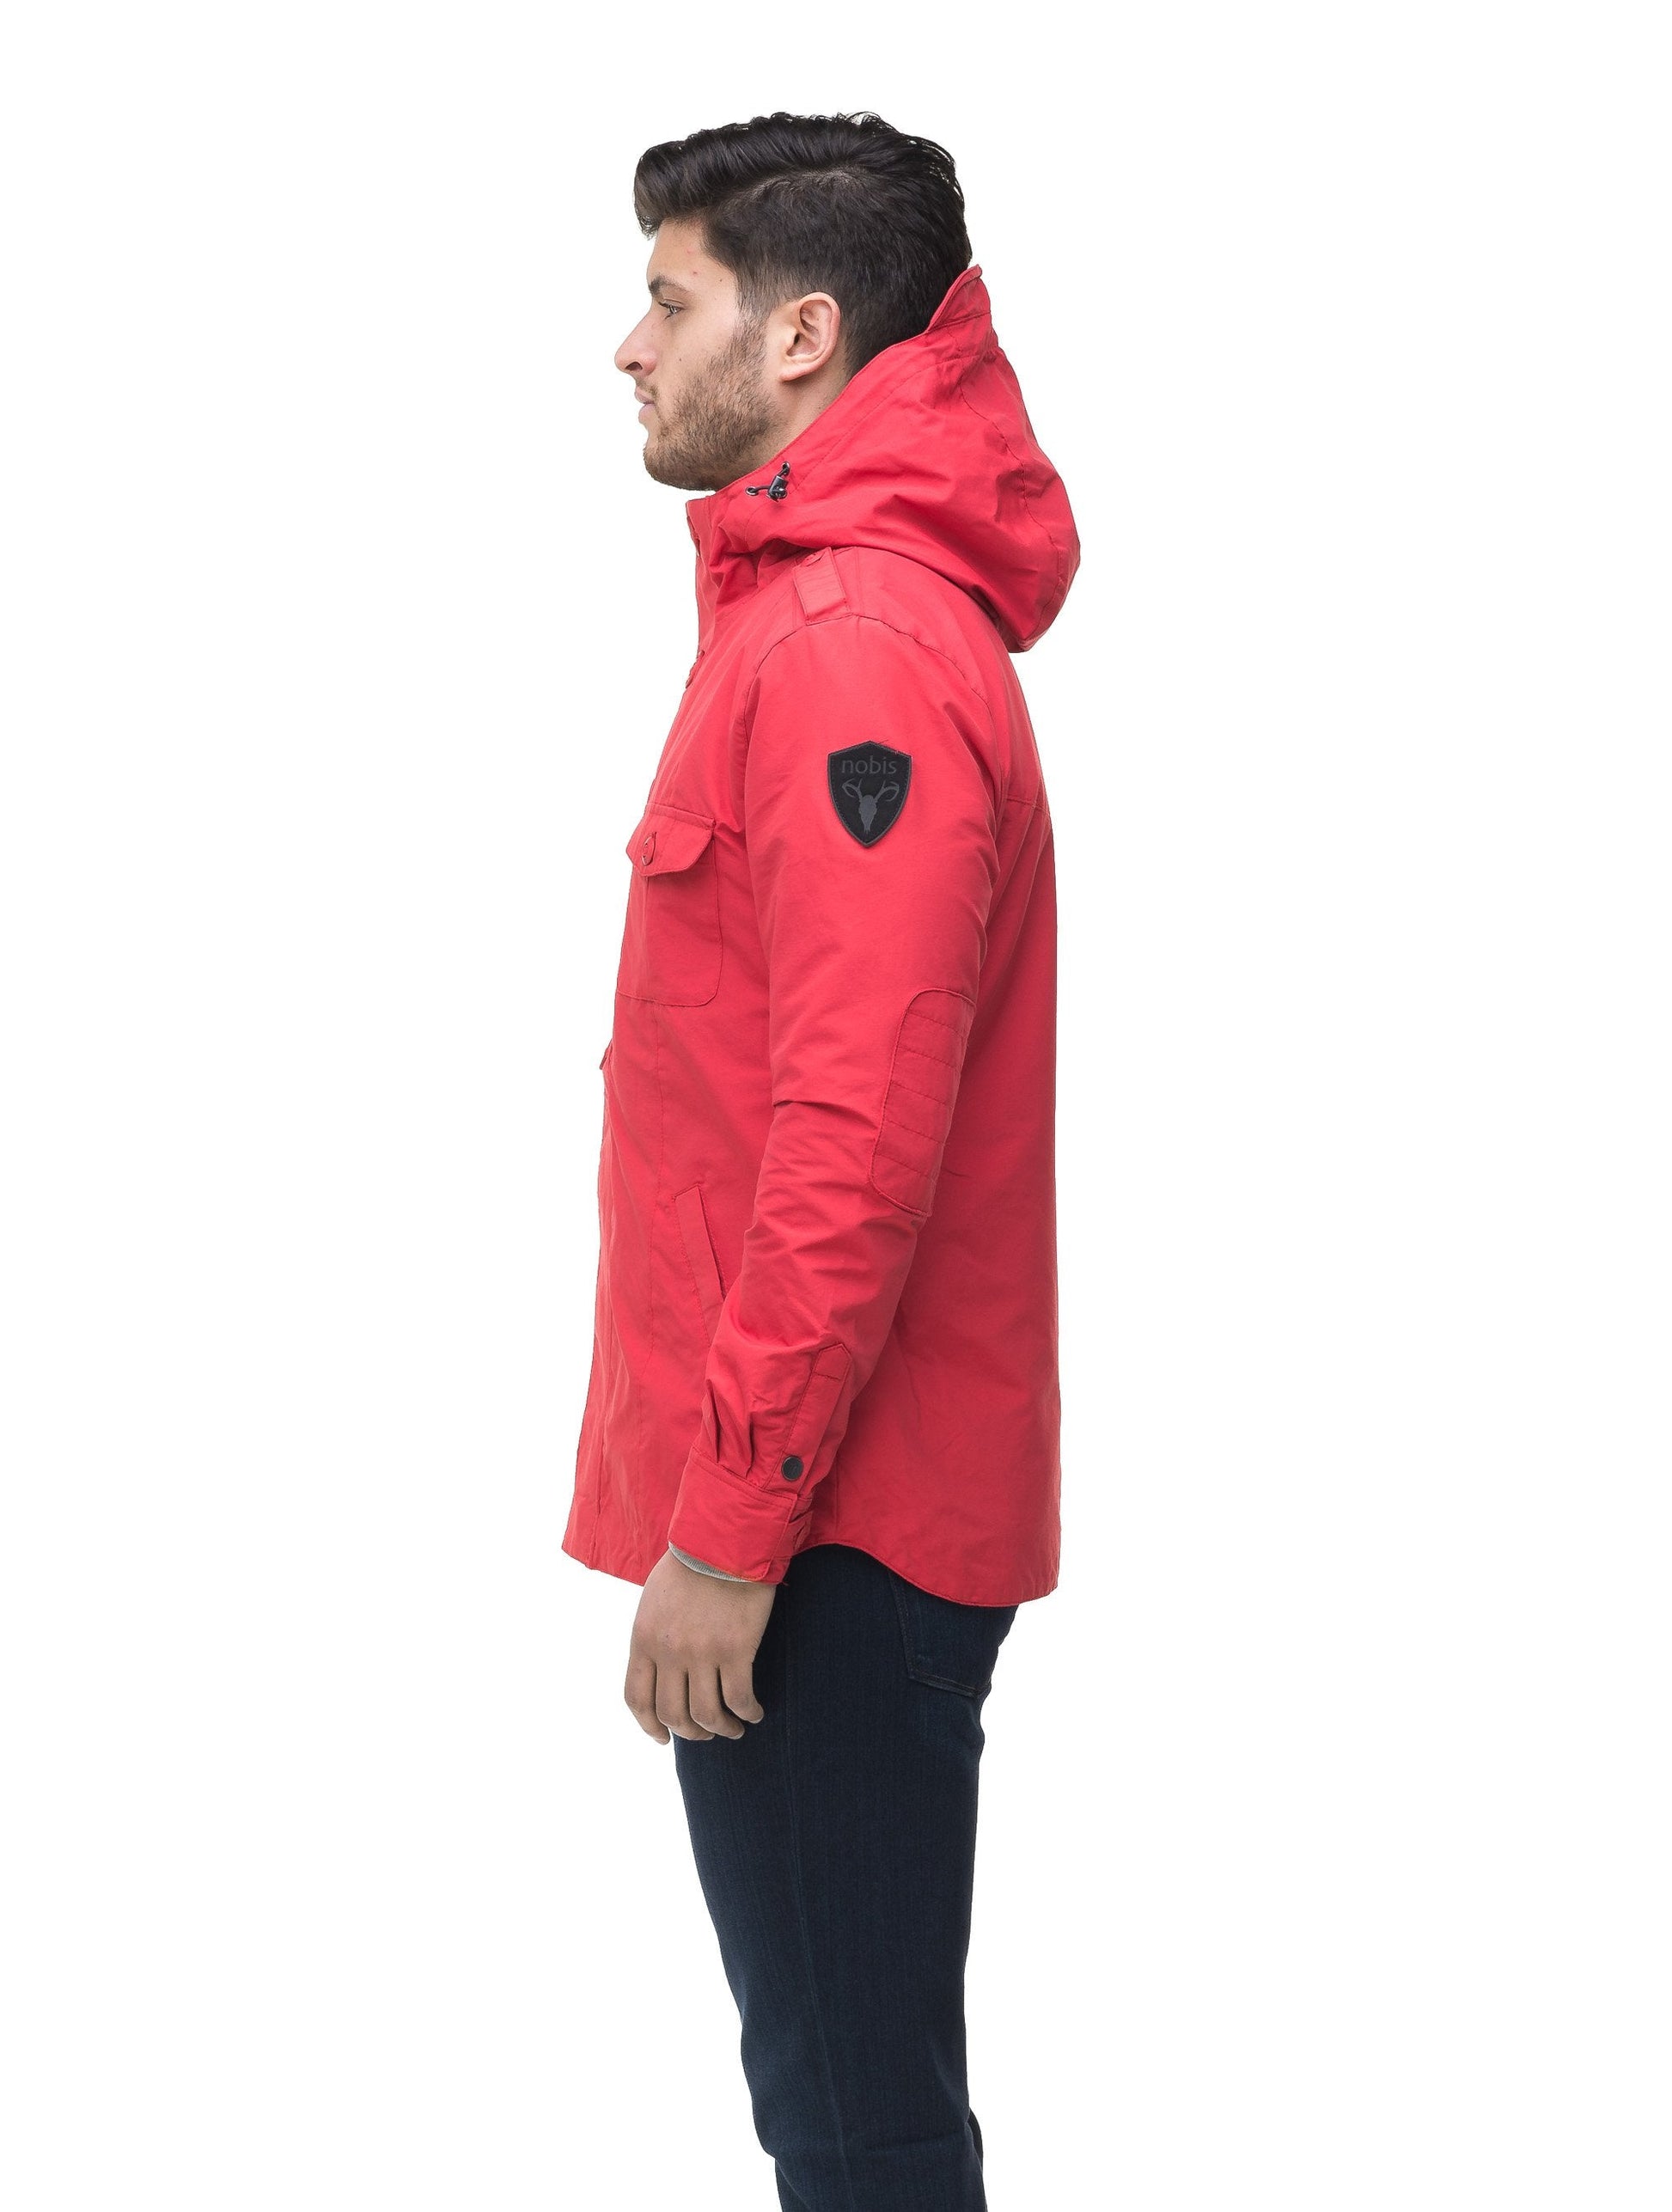 Men's hooded shirt jacket with patch chest pockets in Red